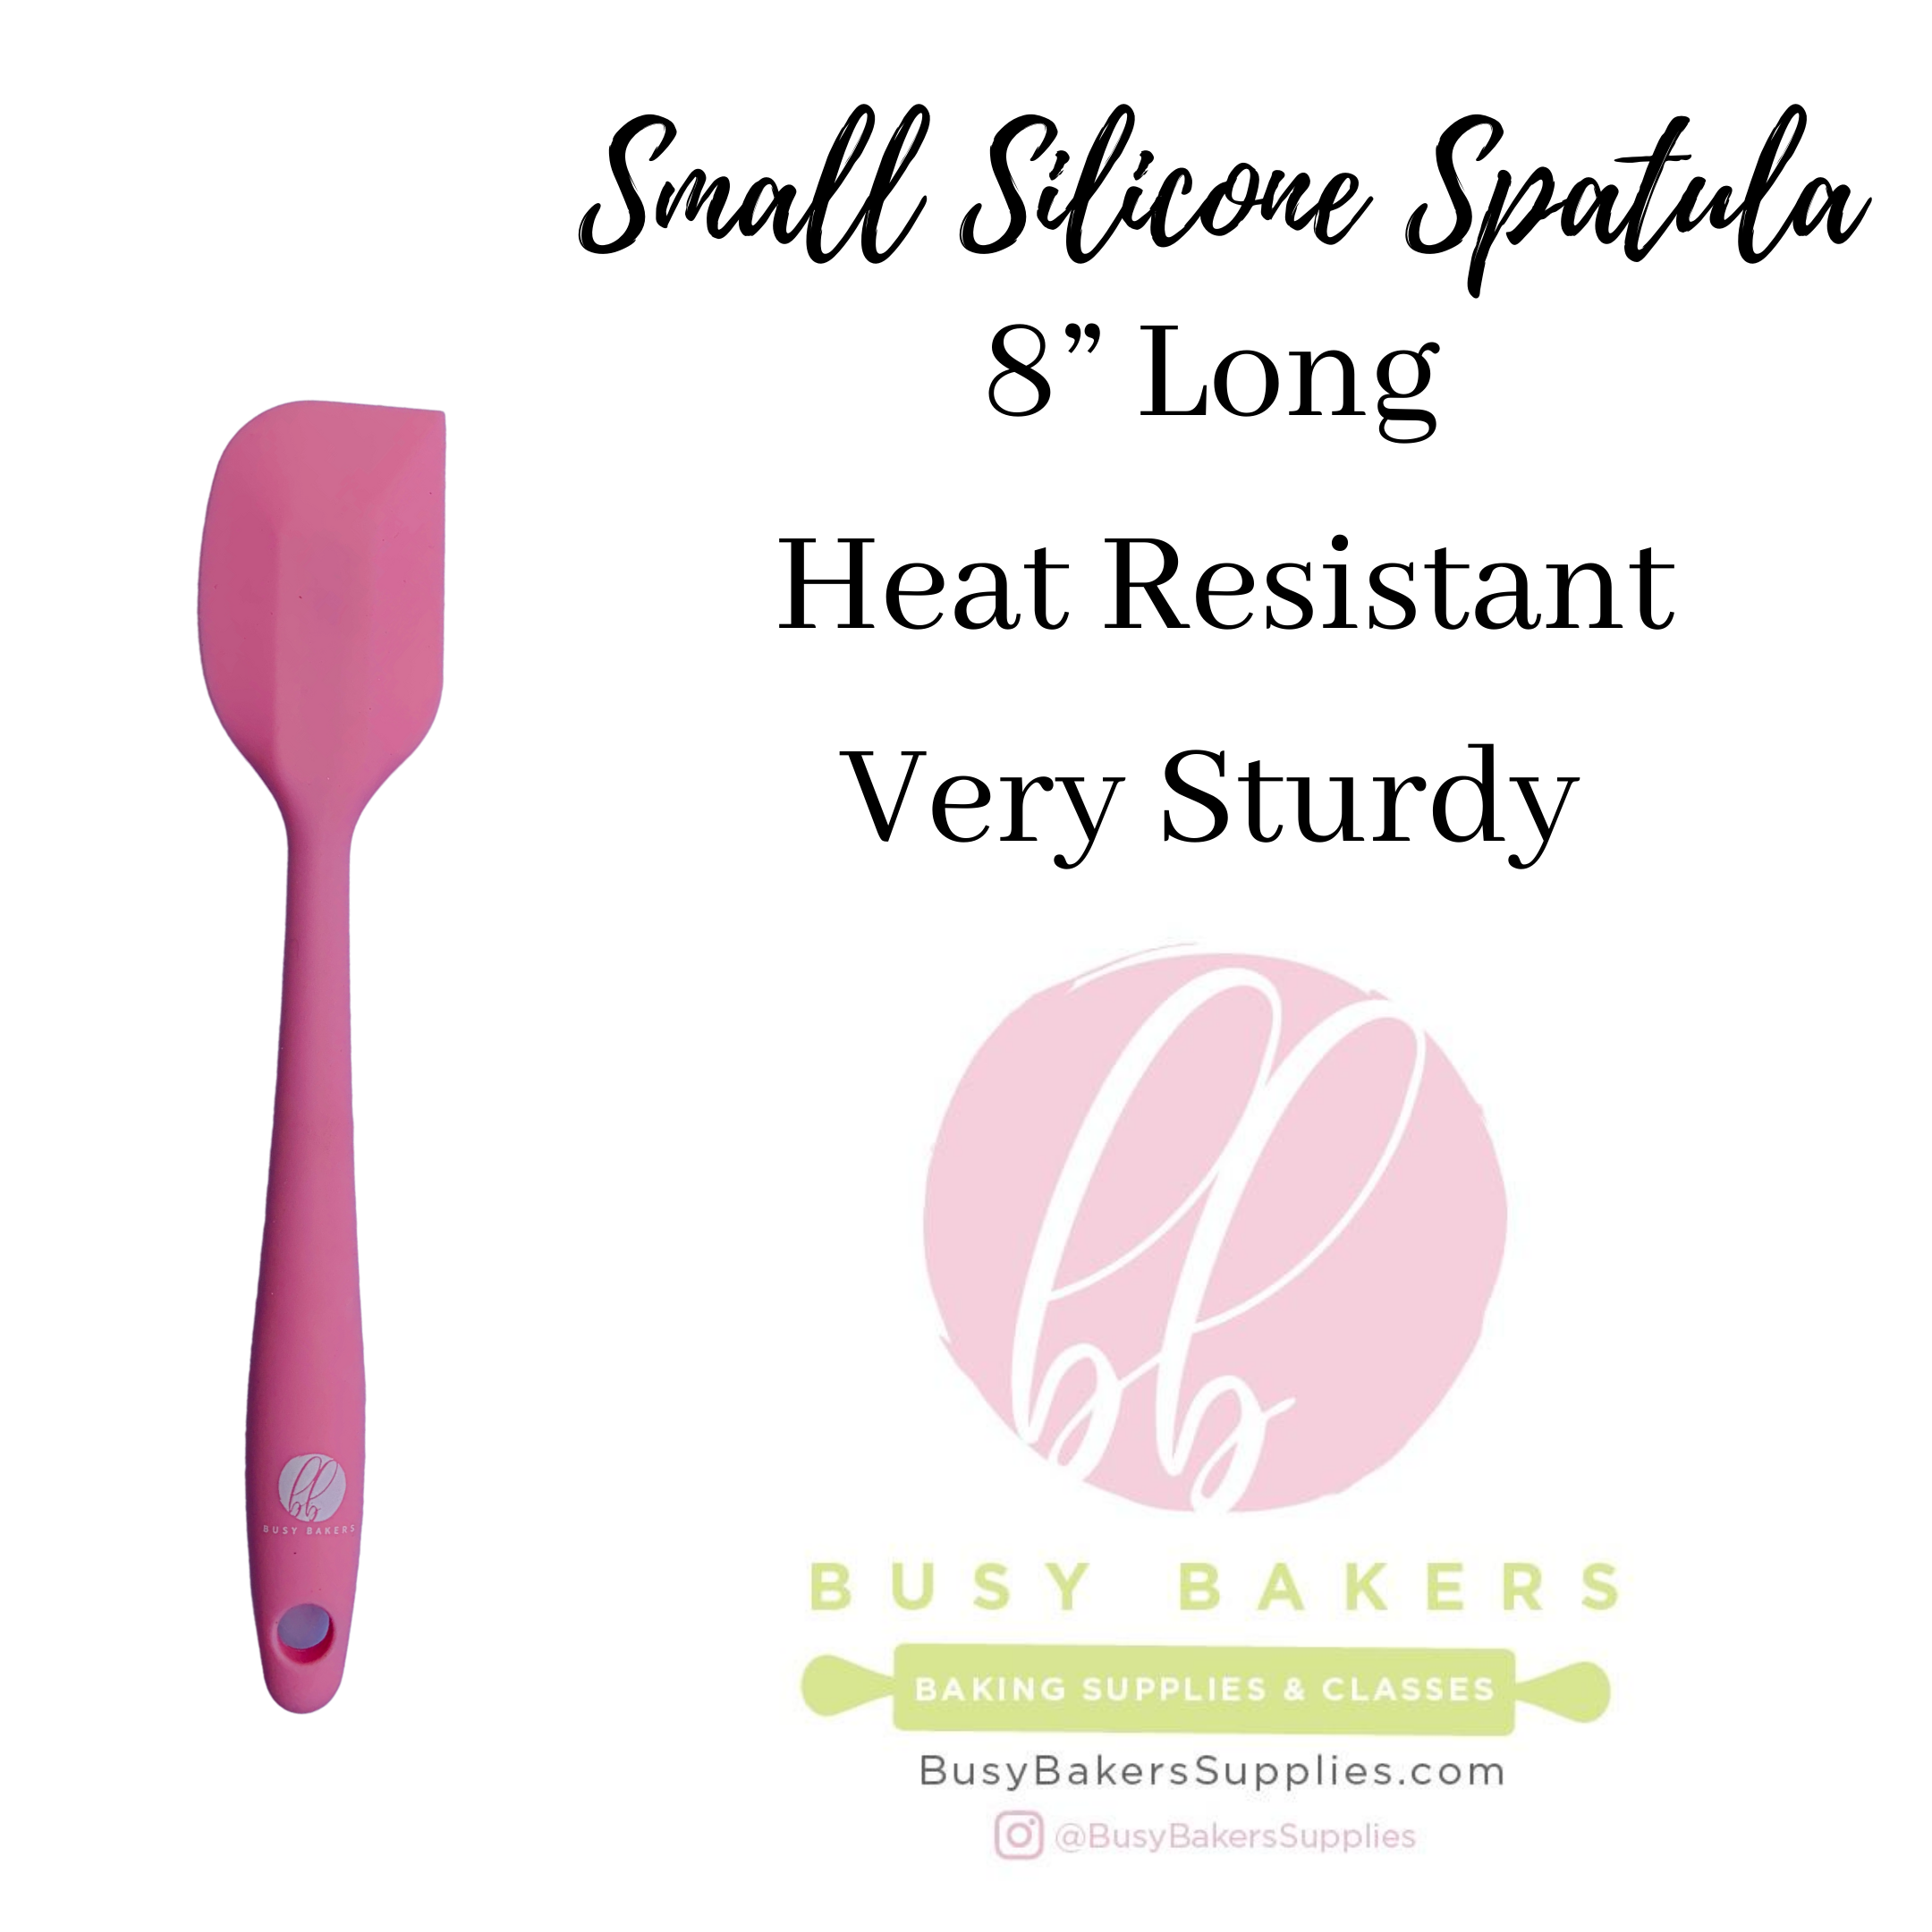 Small Pink Silicone Spatula – Busy Bakers Supplies